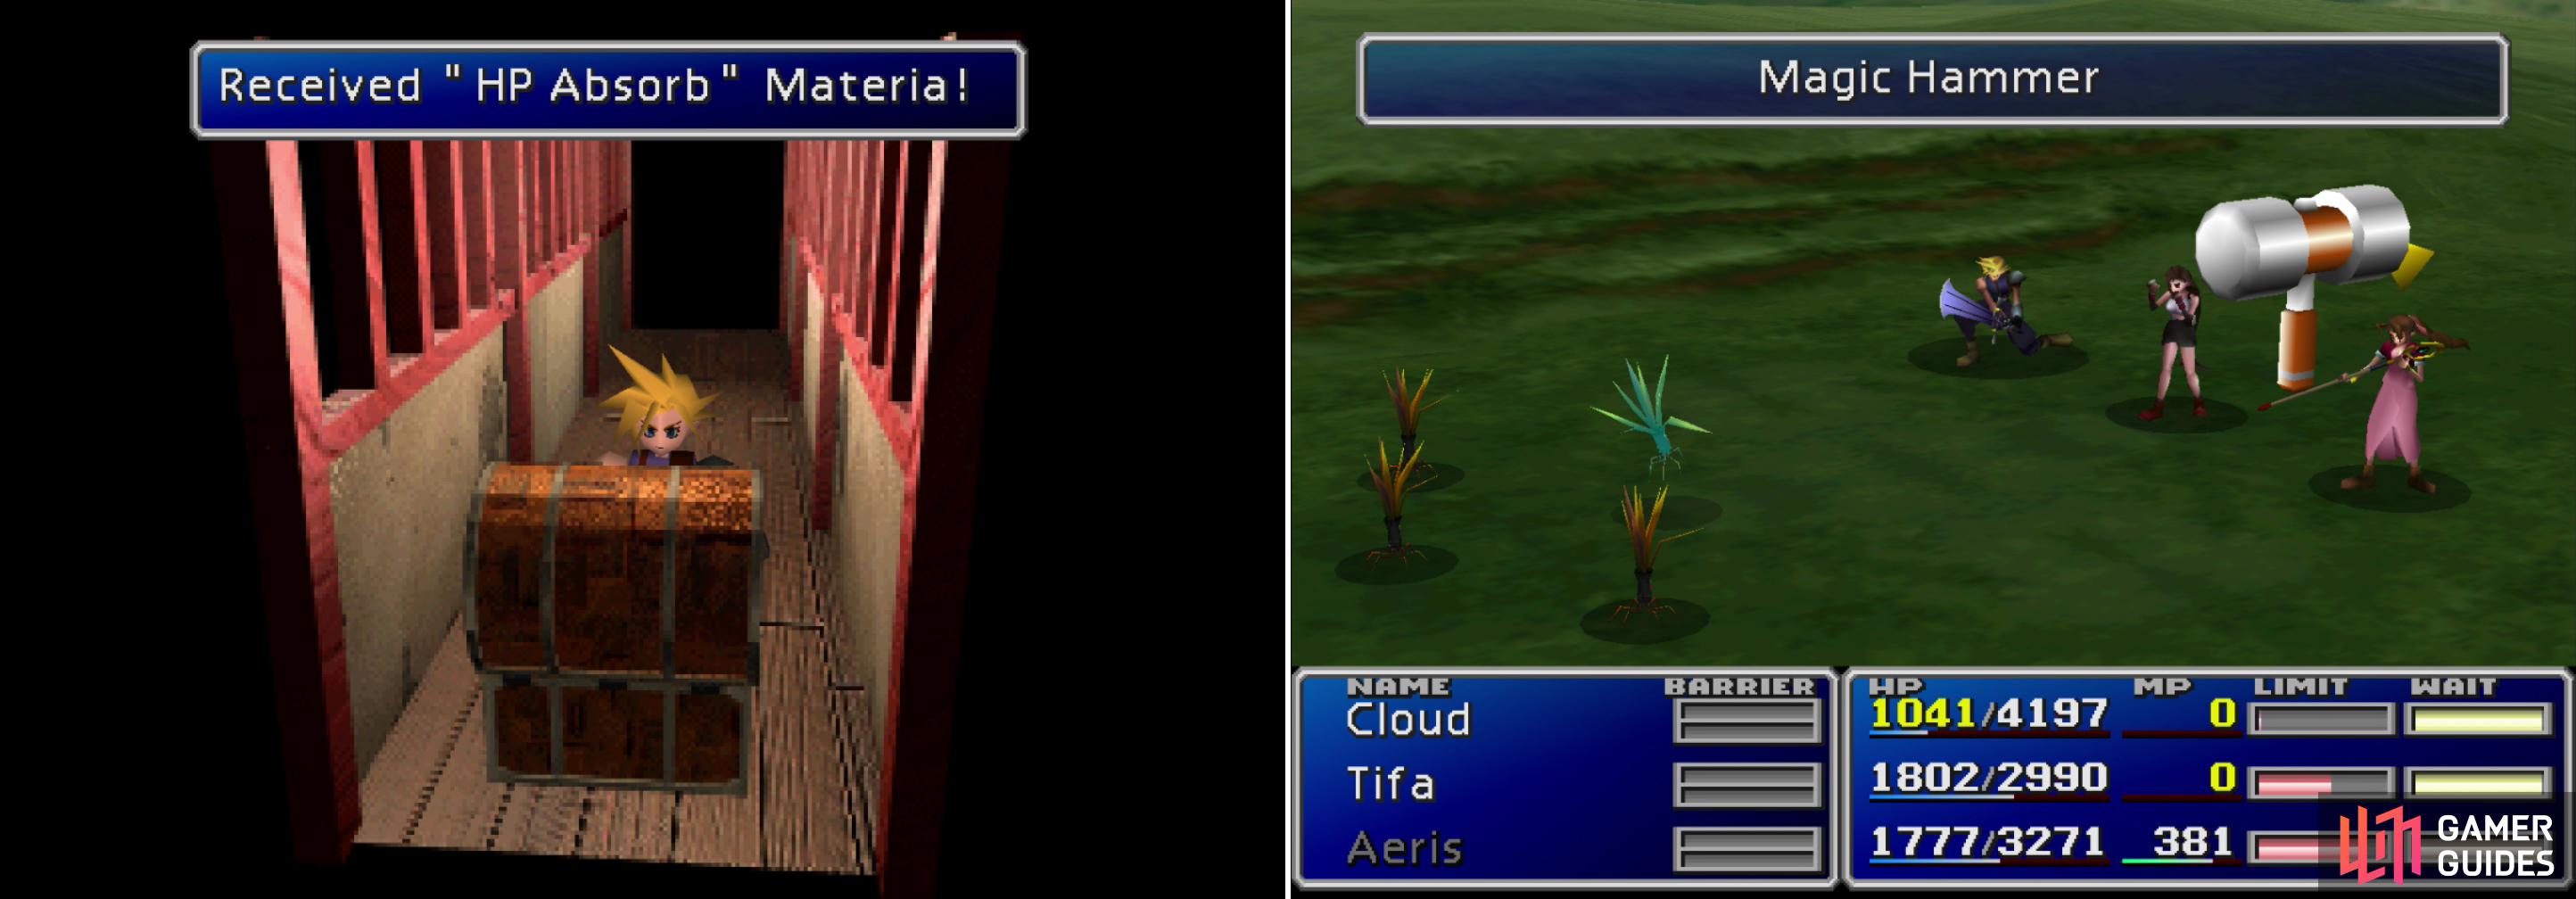 After recovering your Materia, find the HP Absorb Materia in the cat-filled house (left). Learn the “Magic Hammer” Enemy Skill from the Razor Weeds that dwell upon the grasslands outside of Wuiai (right).